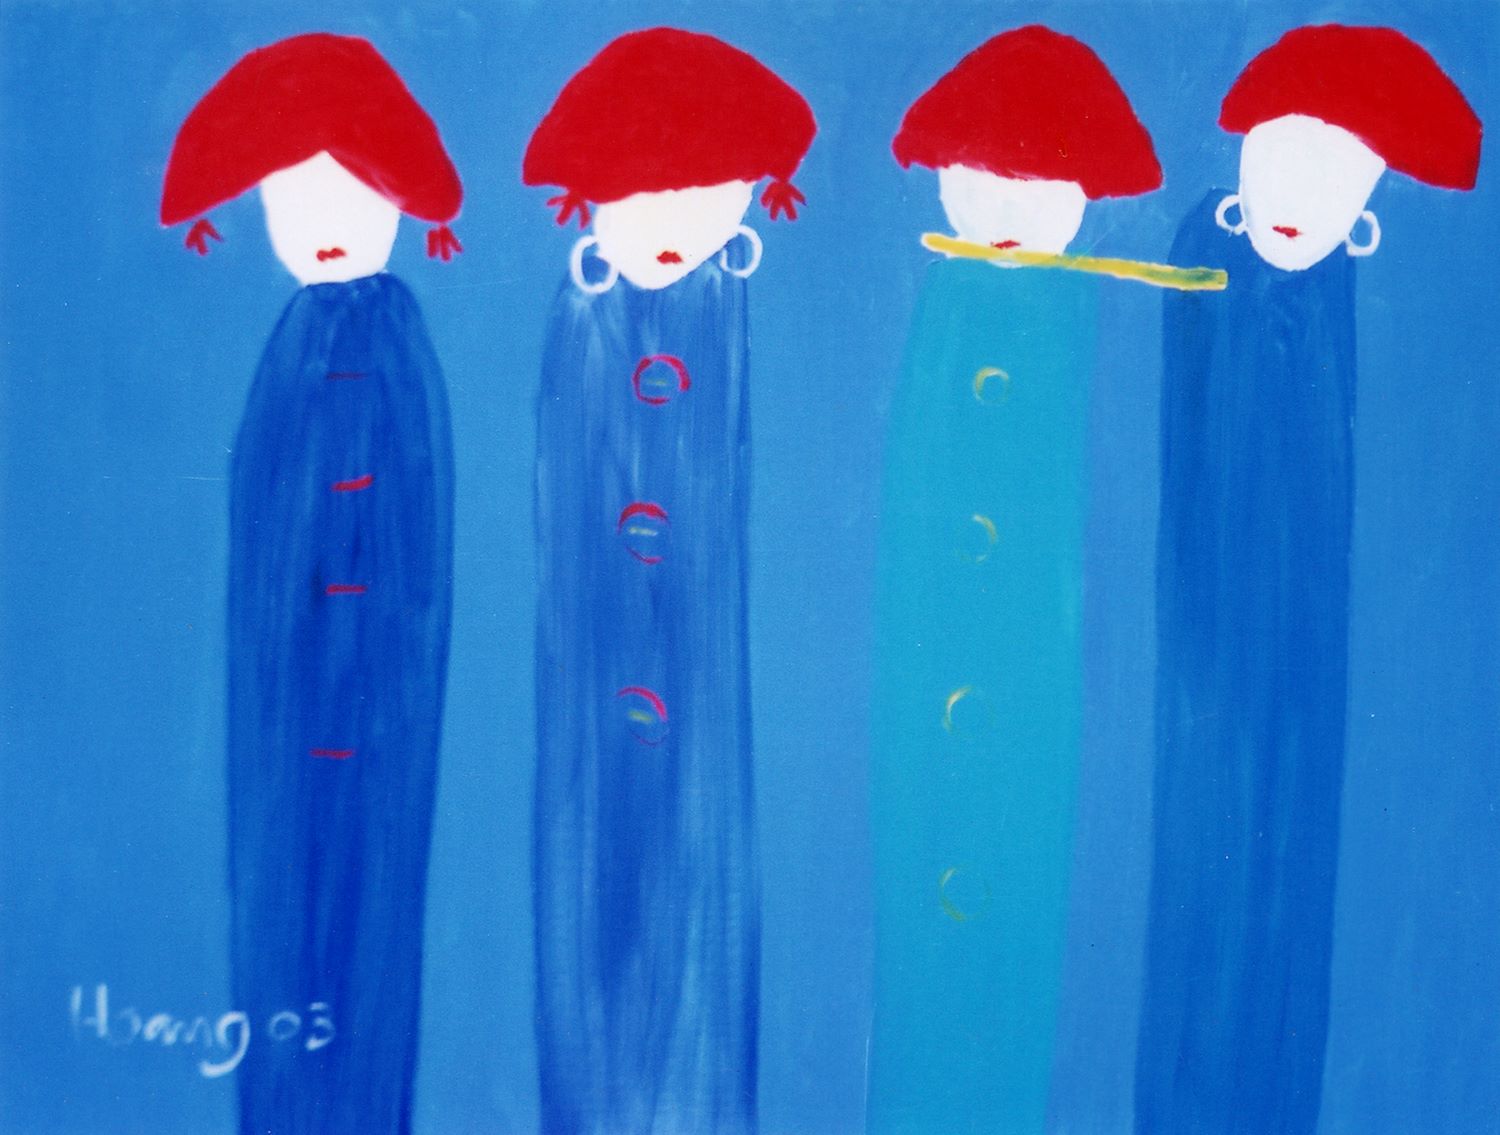 Flute Girls - Vietnamese Acrylic Painting by Artist Ngo Duc Hoang